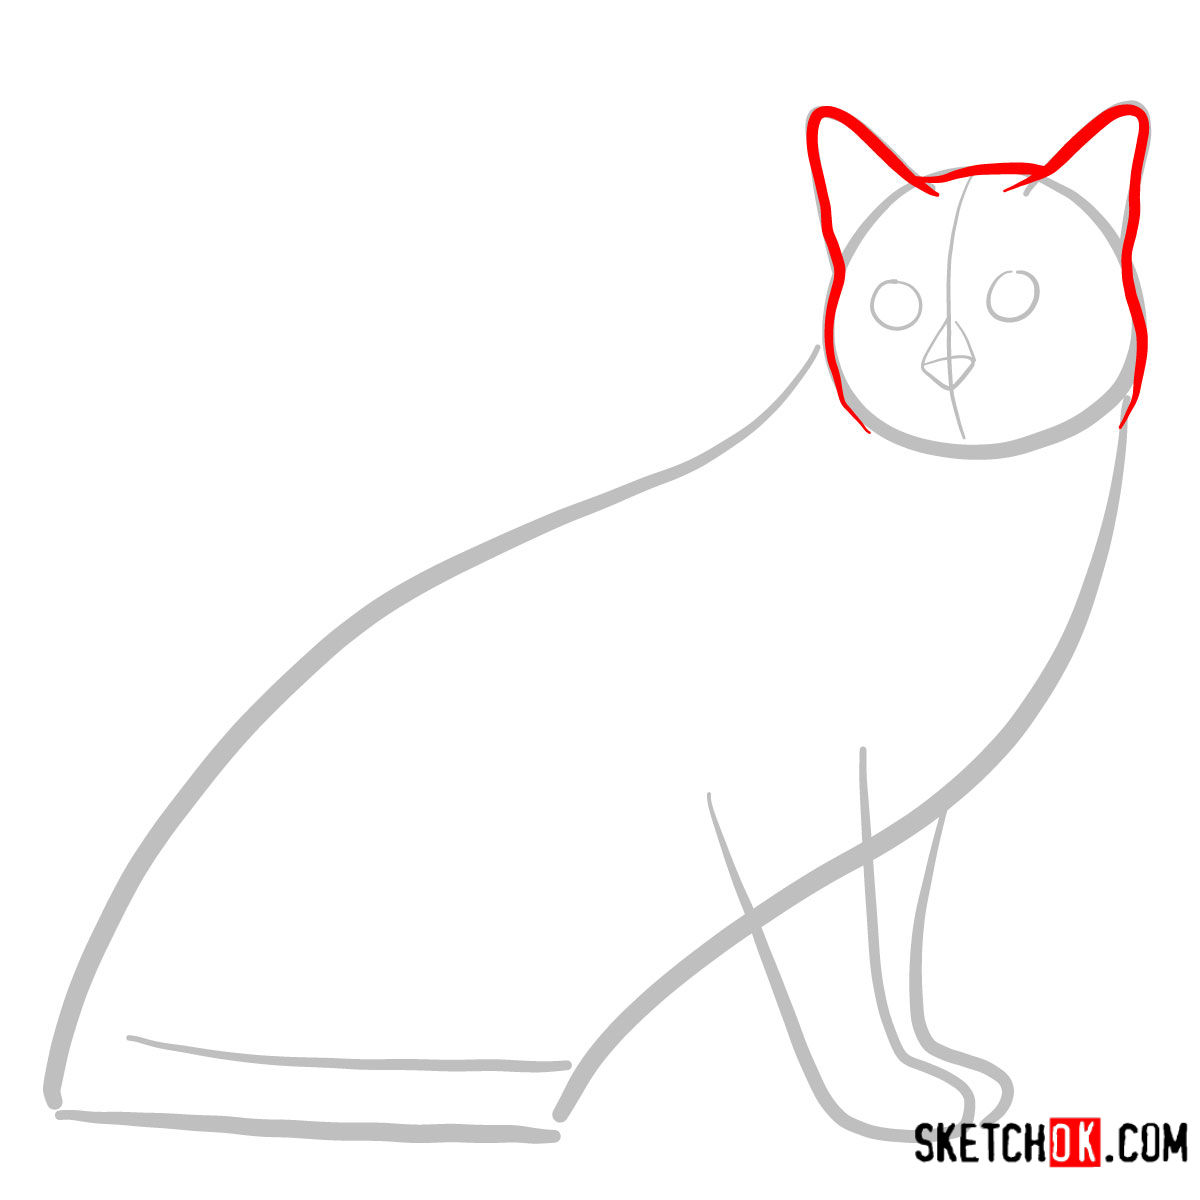 How to draw the Tonkinese cat - step 02